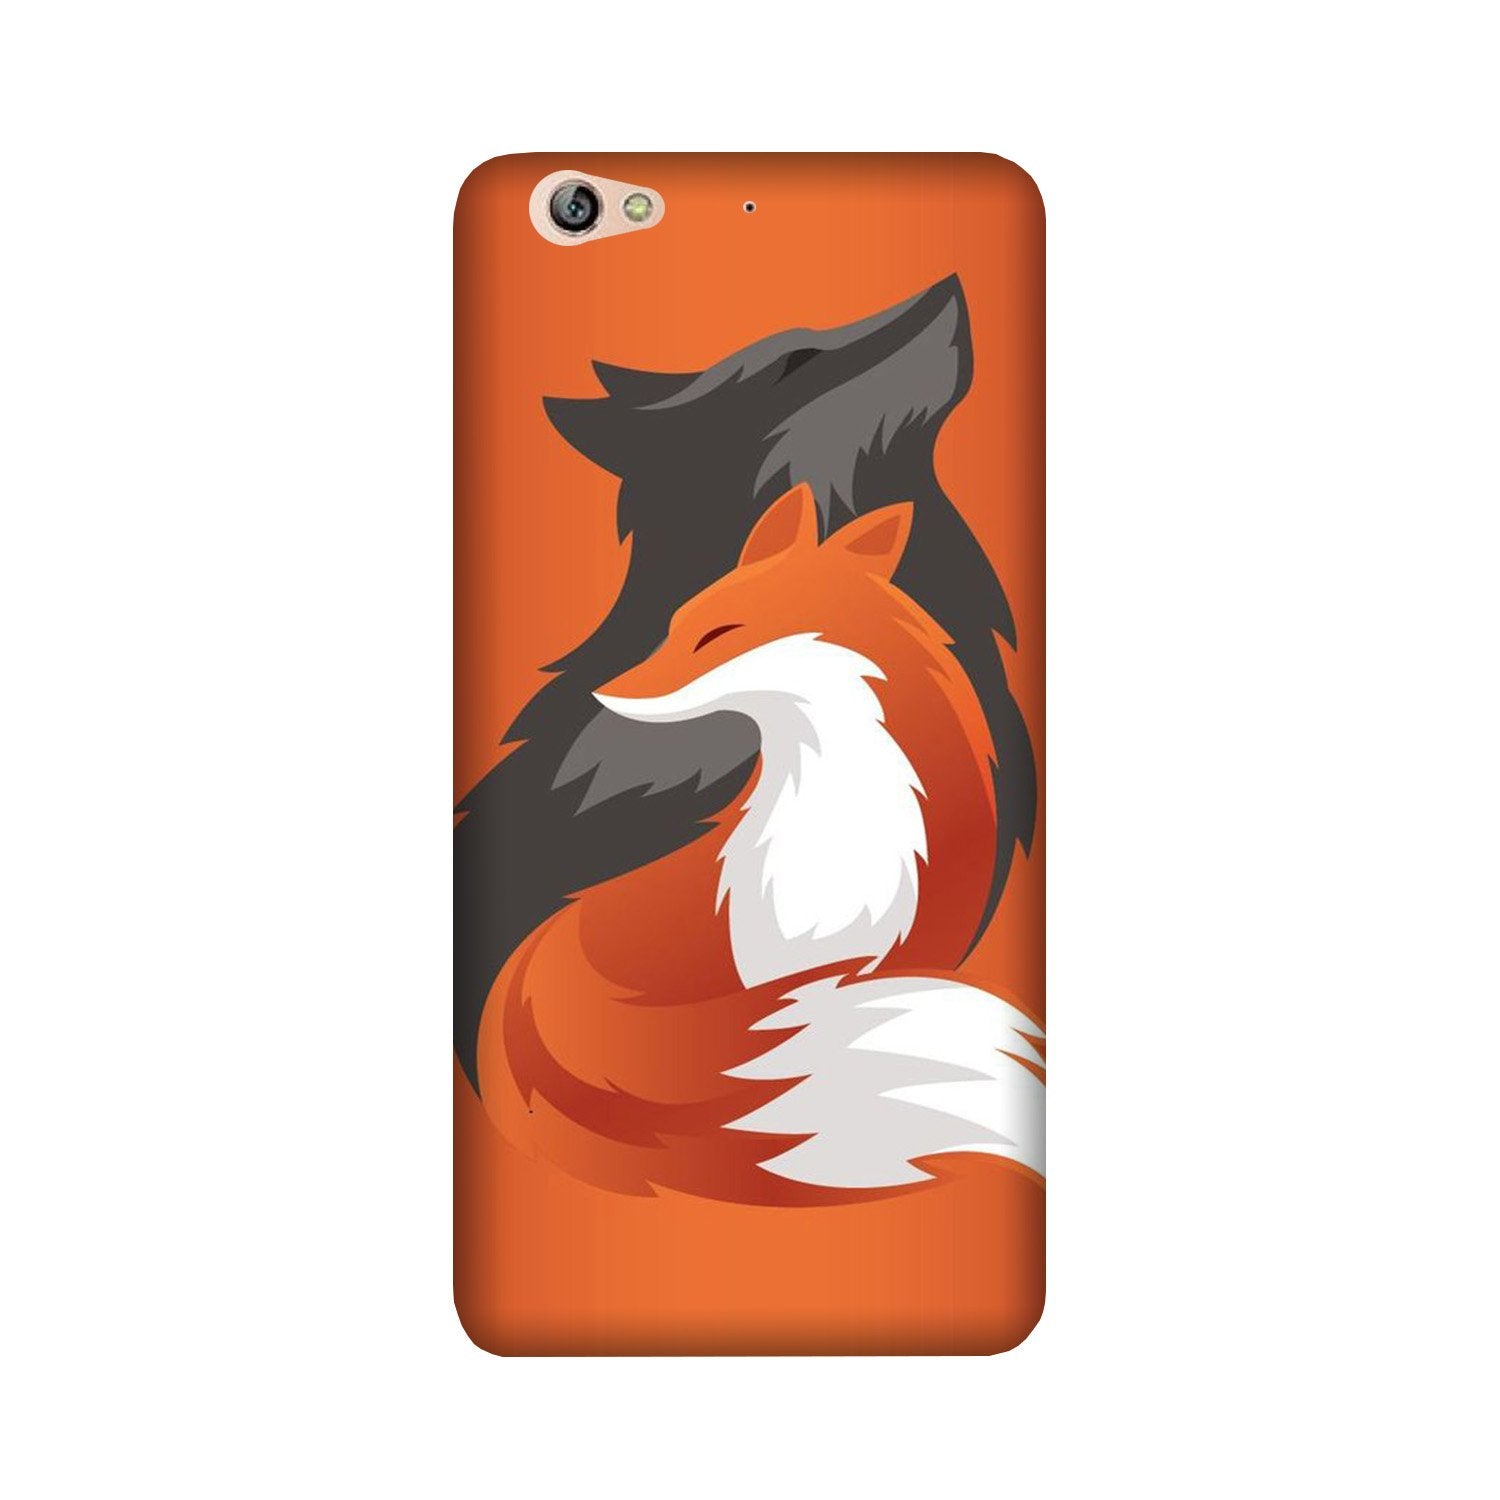 Wolf  Case for Gionee S6 (Design No. 224)